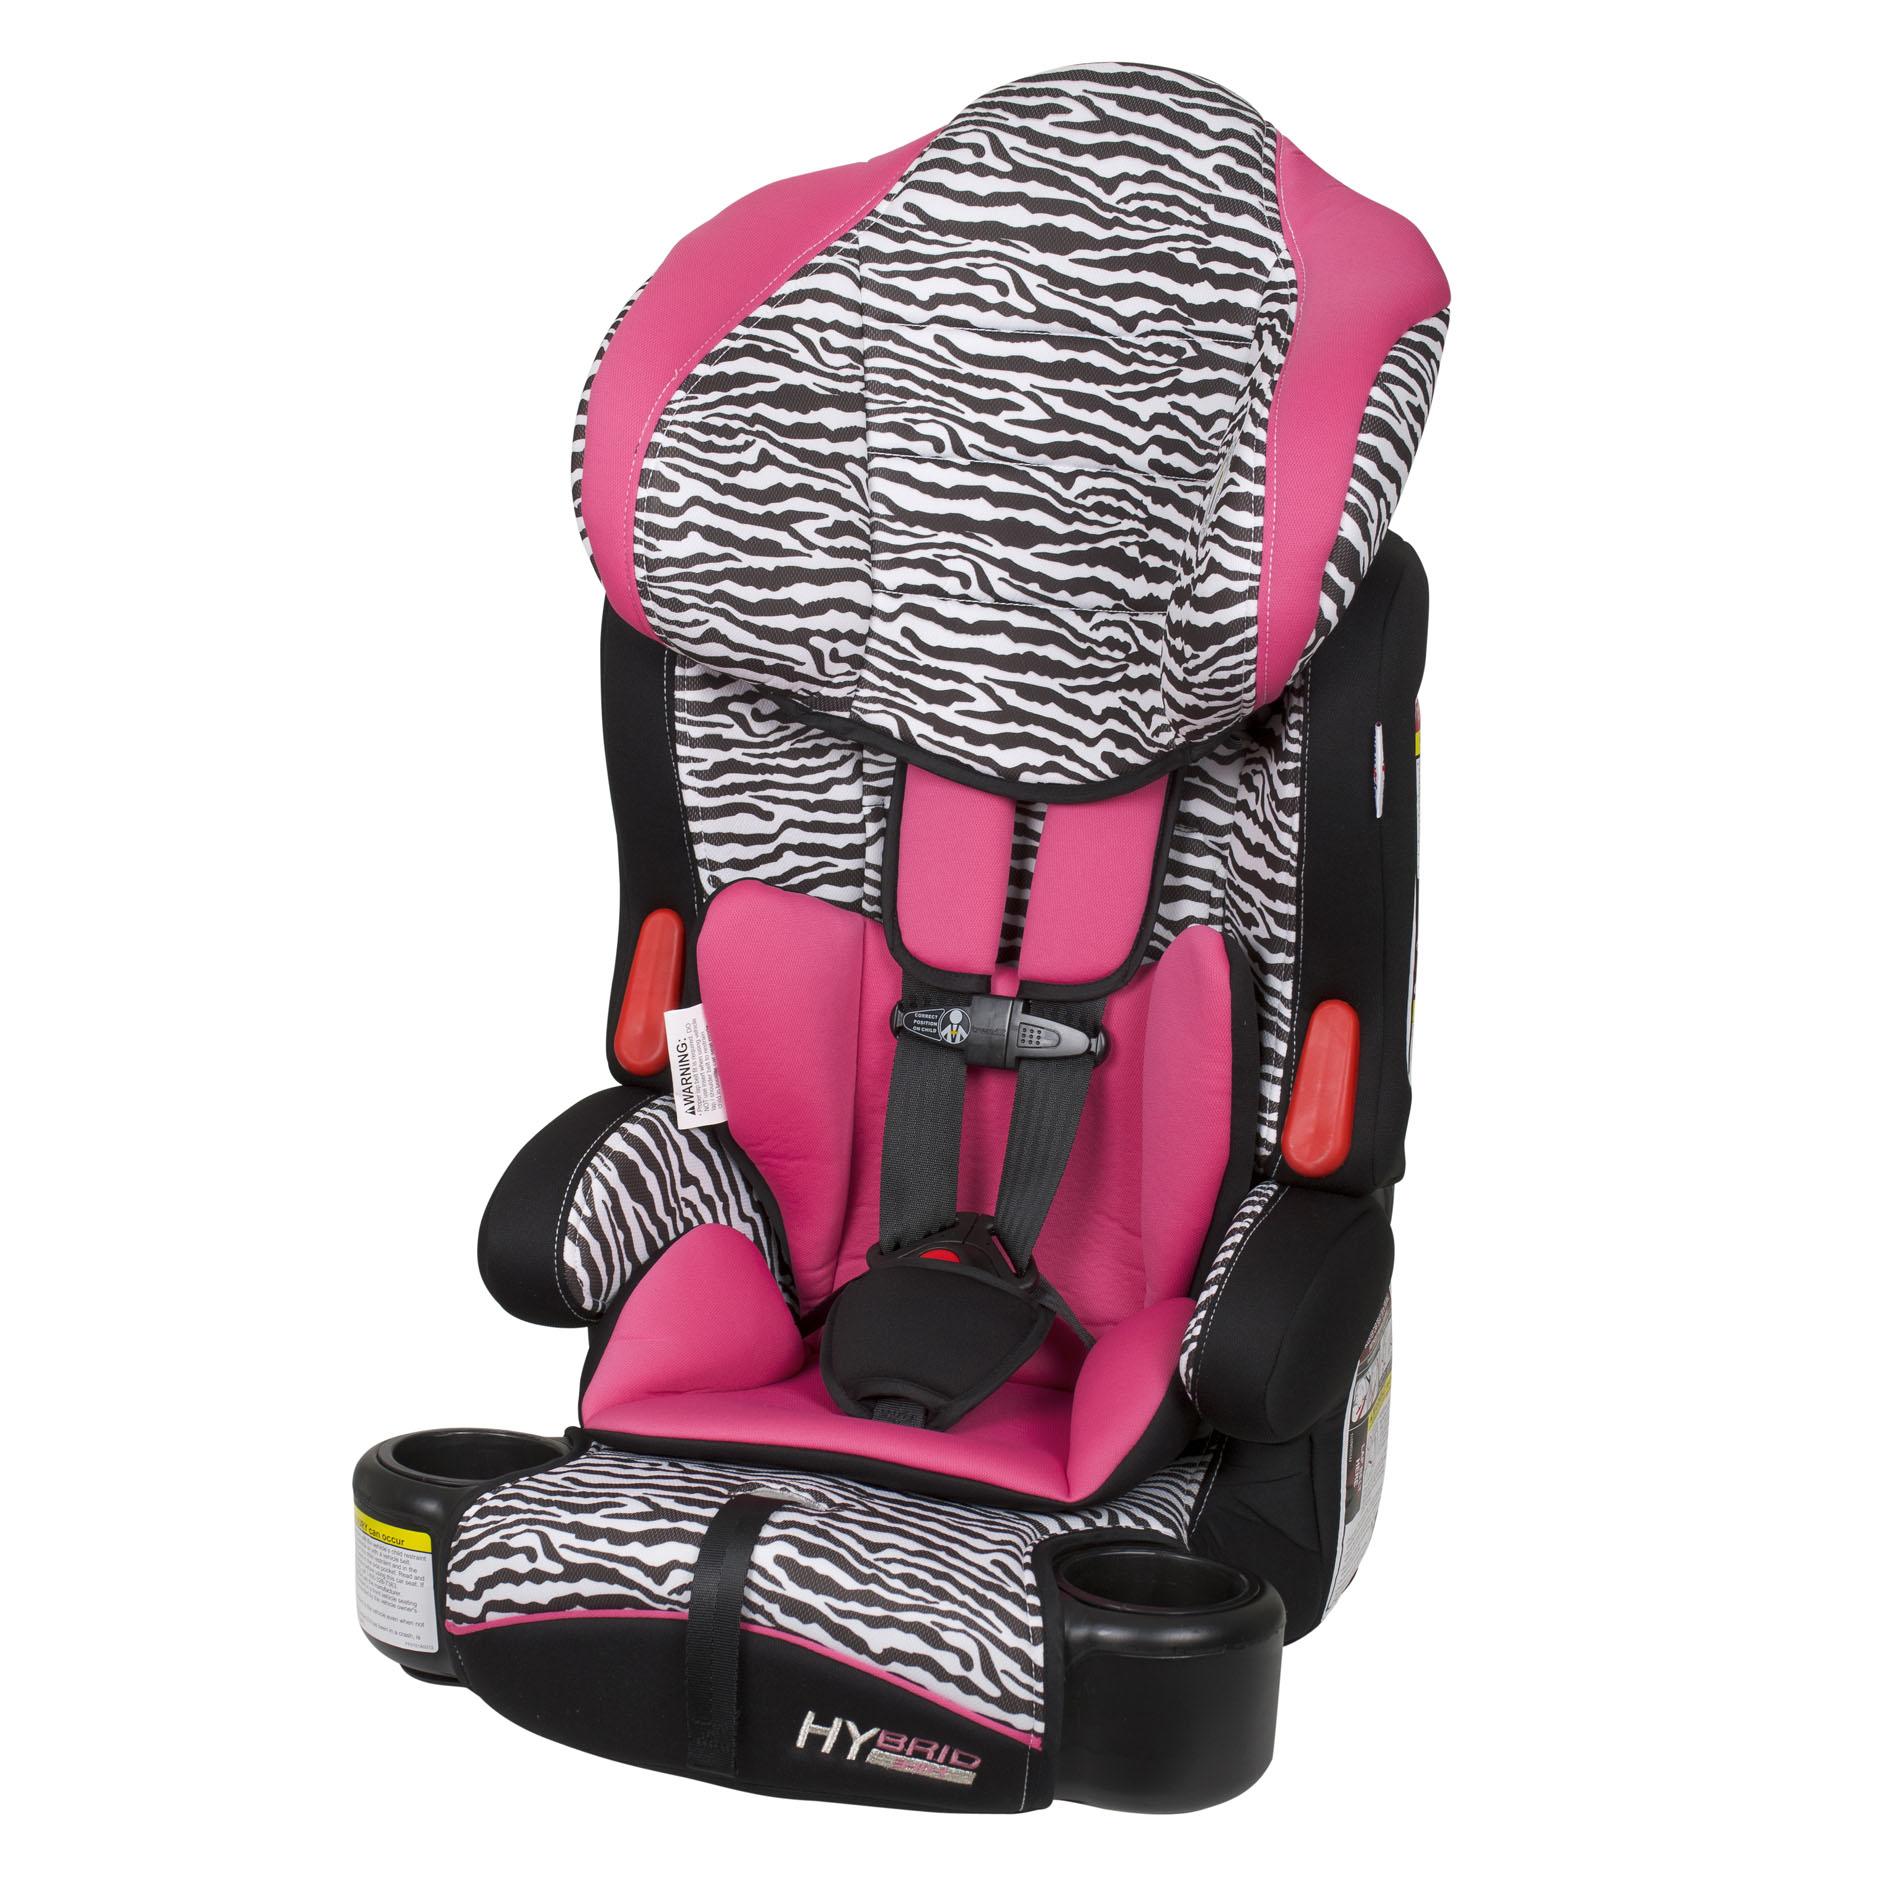 0090014014711 - HYBRID 3-IN-1 BOOSTER CAR SEAT 22-100 LBS.